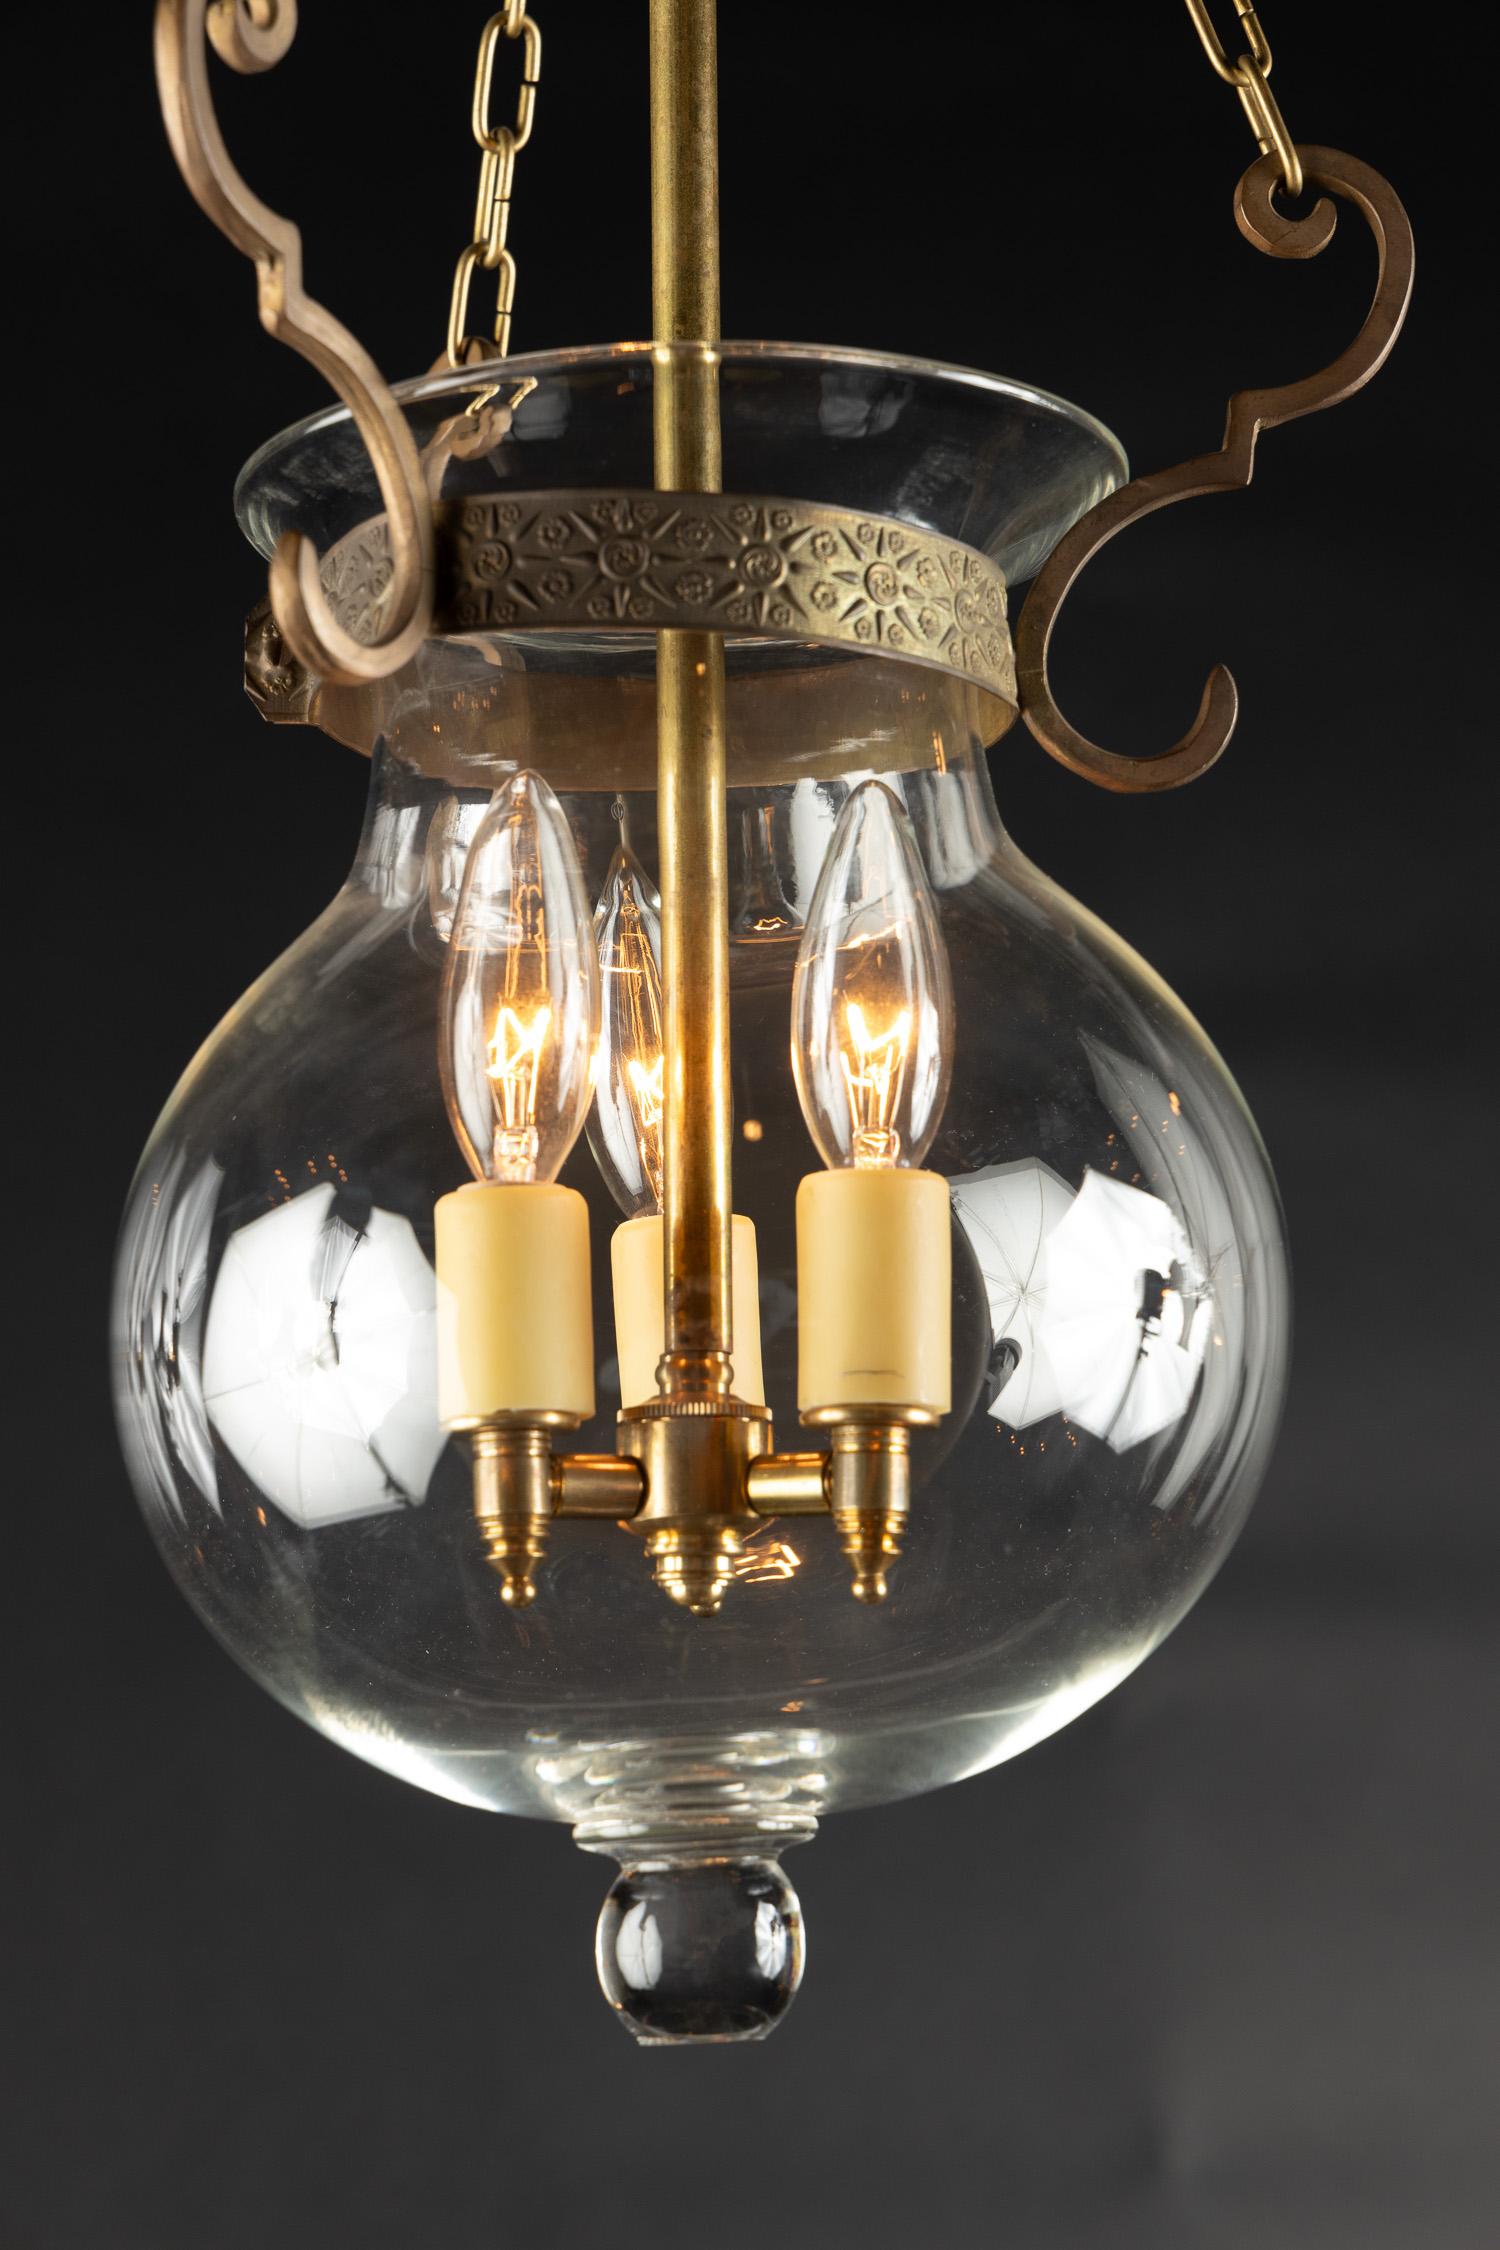 This simple yet beautiful small Italian cloche lantern features hand blown glass in a classic baluster shape. The mid 20th century piece features bronze scroll work at the top which connects to the glass lip, accompanied by a bronze center stem